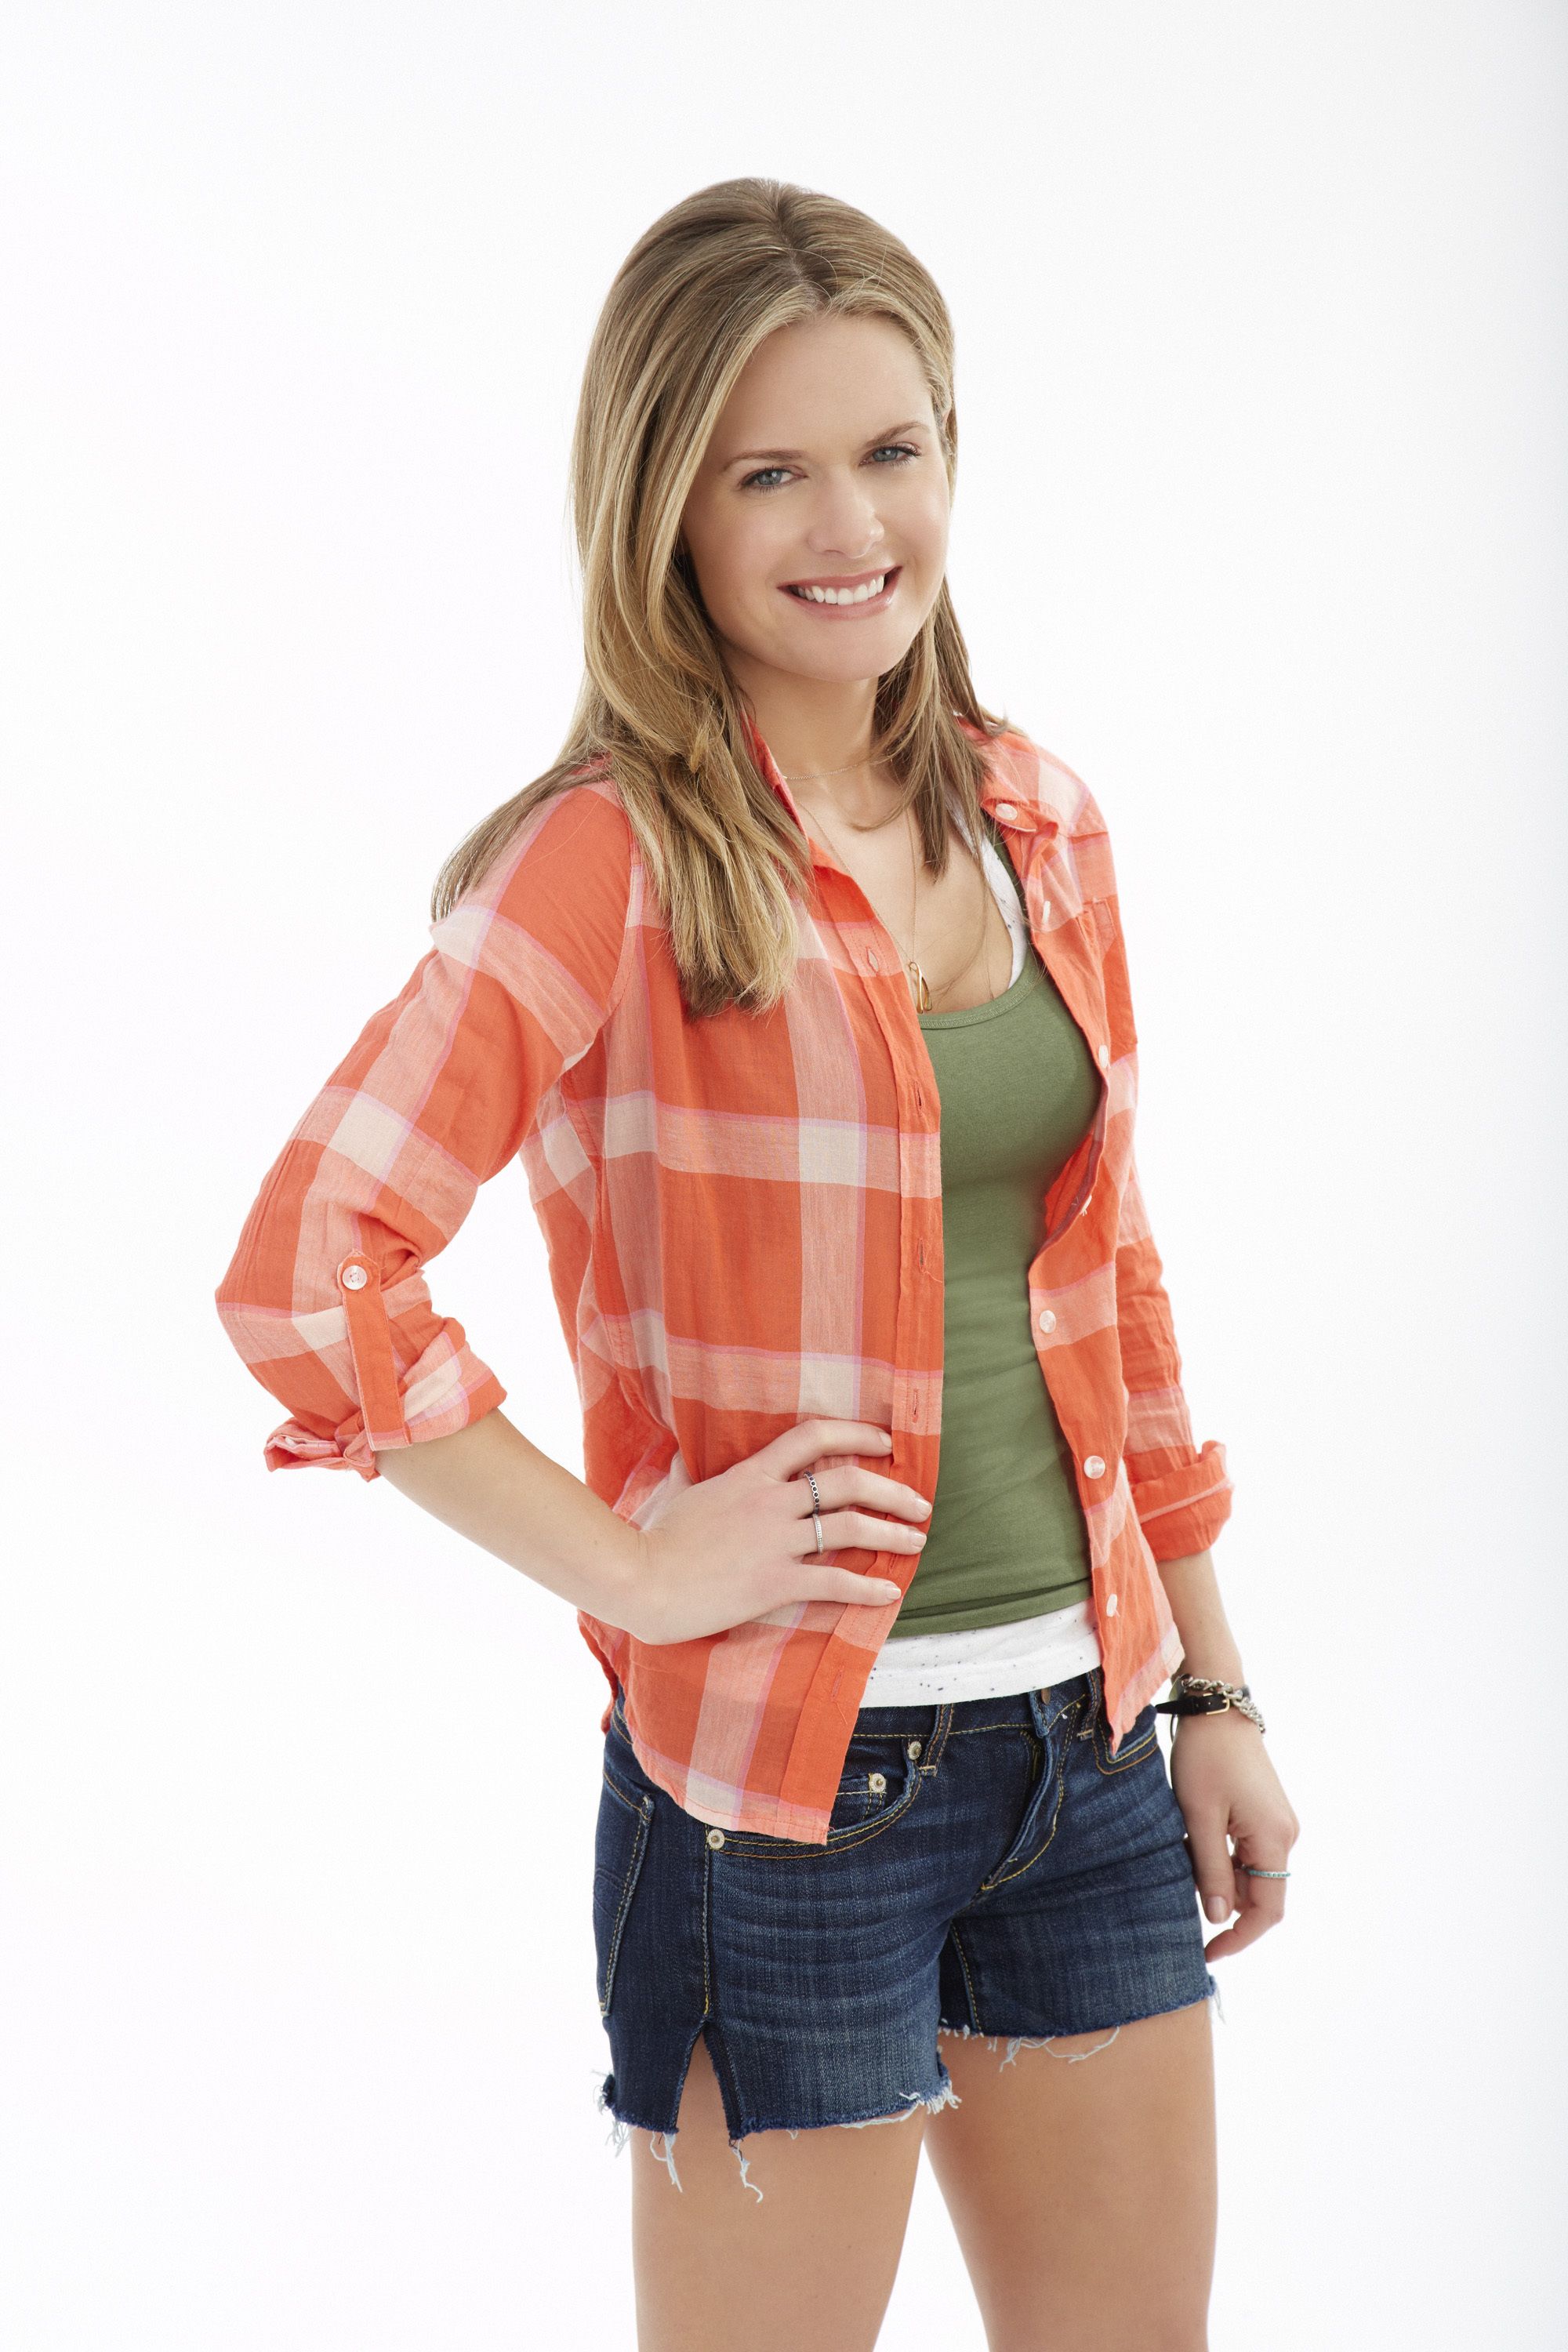 Hot And Sexy Pictures Of Maggie Lawson.